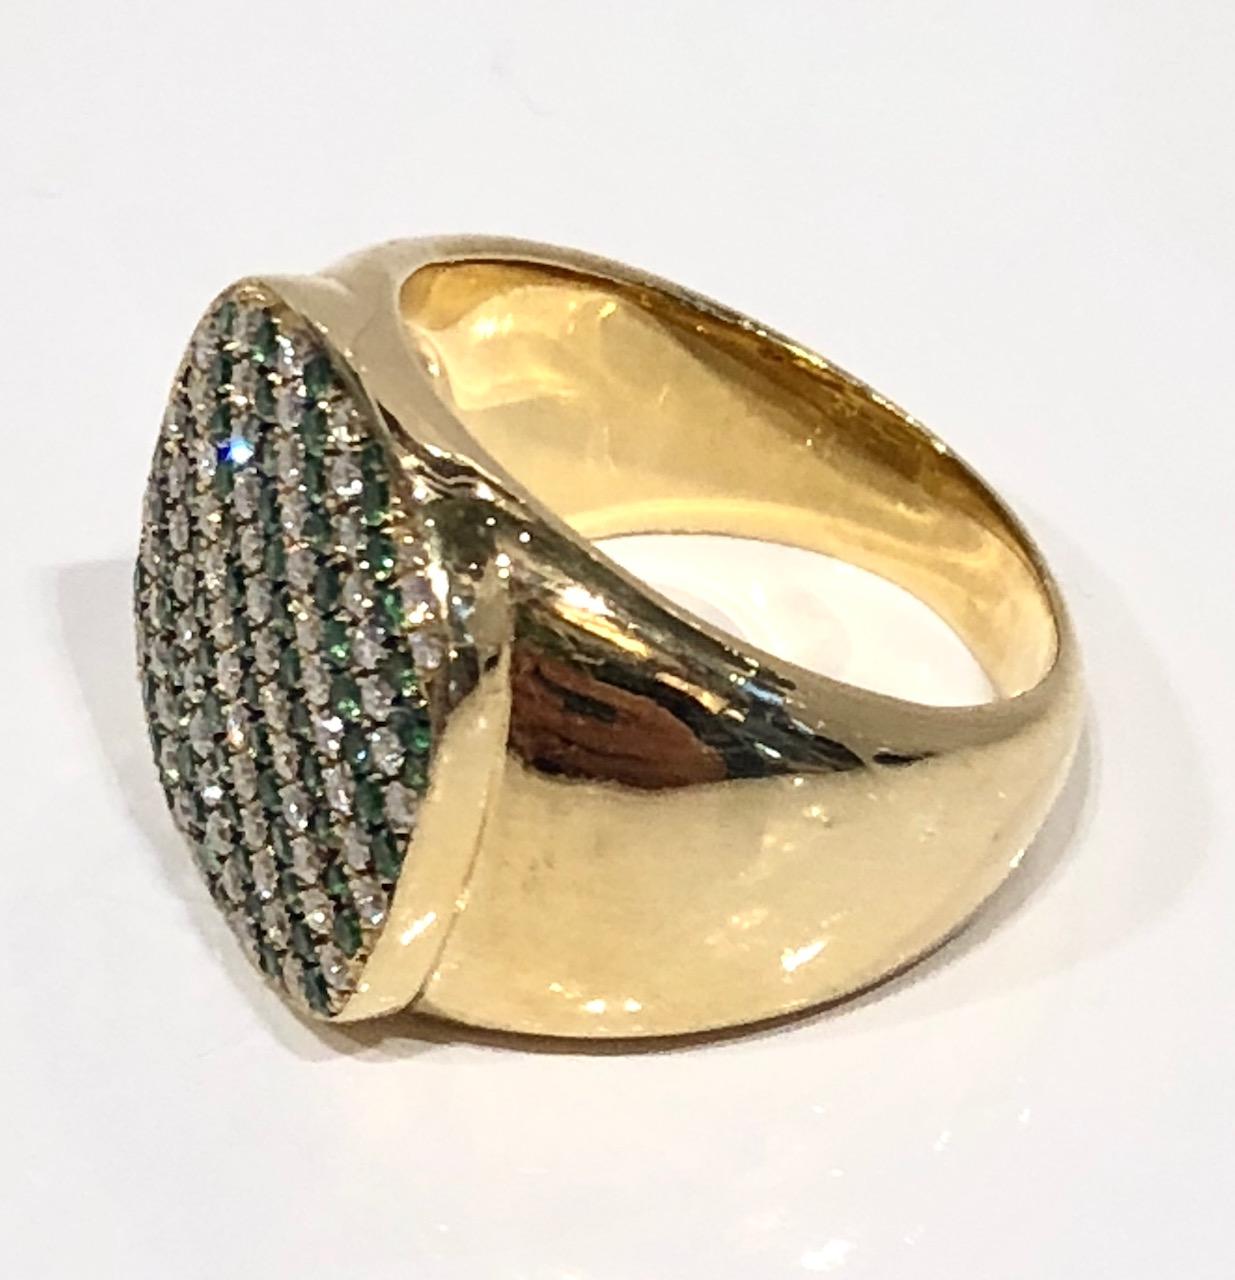 Unisex 18k yellow gold Signet ring with diamond and green tsavorite garnet pave face.
Designed by Martyn Lawrence Bullard
Can be made in any size, lead time 4 weeks